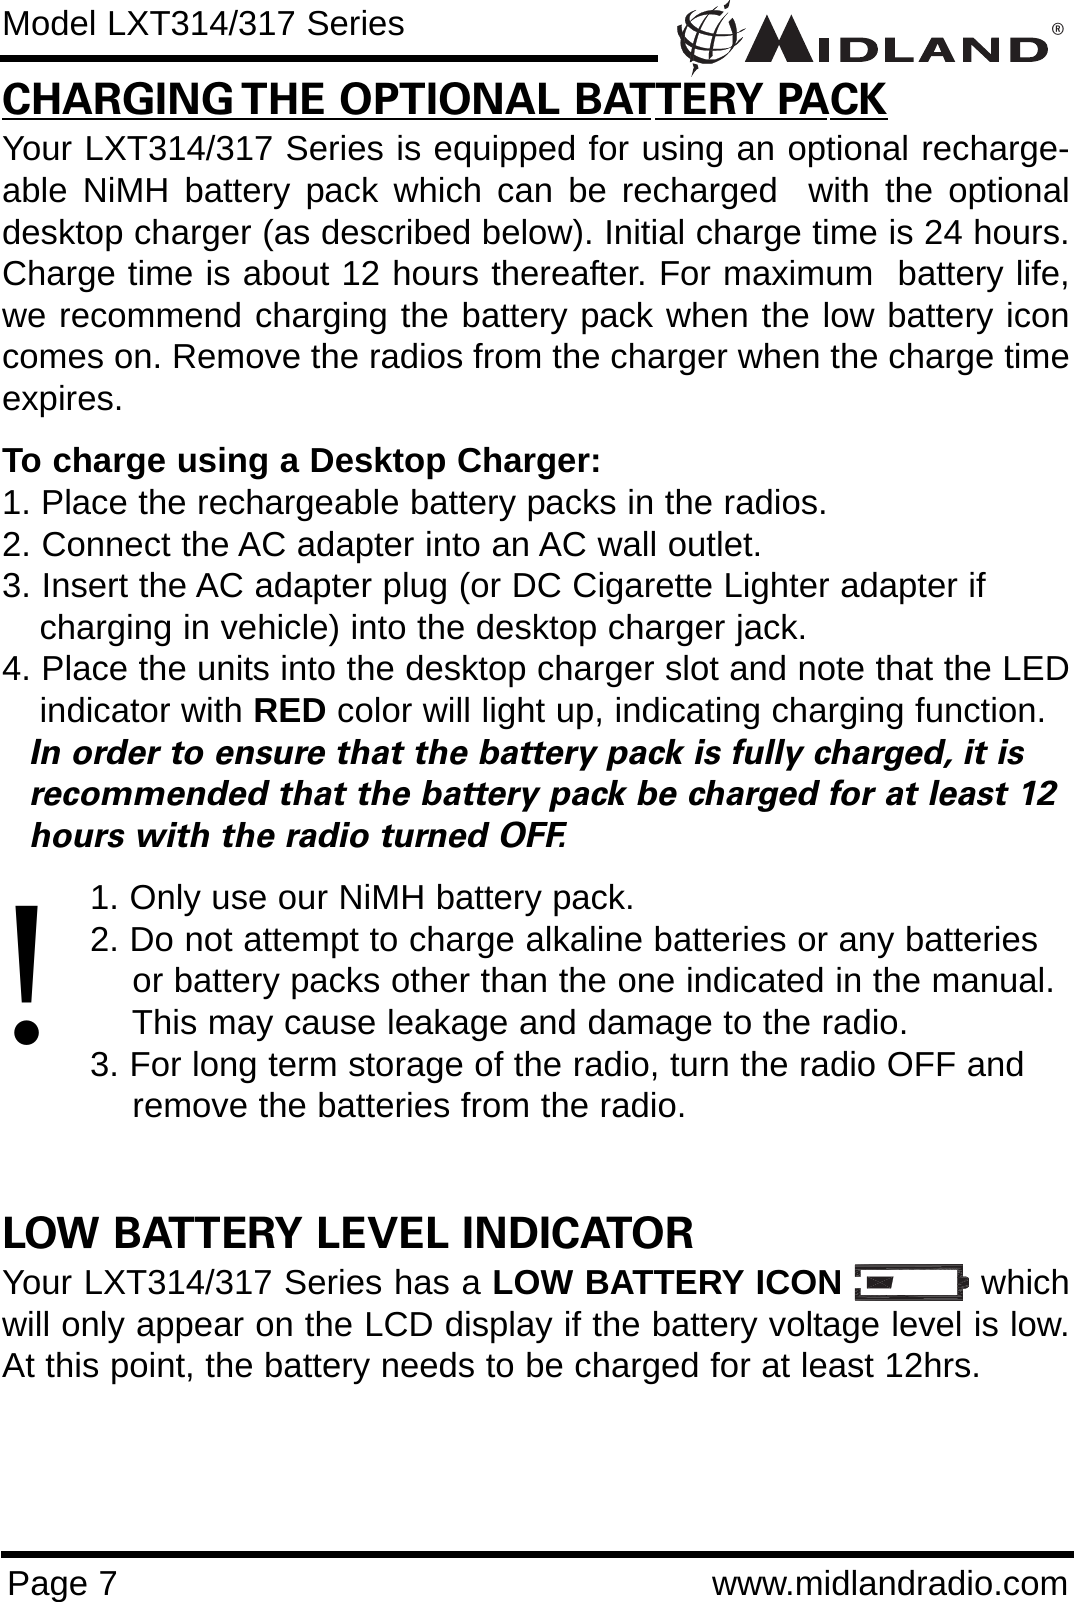 ®Page 7 www.midlandradio.comCHARGING THE OPTIONAL BATTERY PACKYour LXT314/317 Series is equipped for using an optional recharge-able NiMH battery pack which can be recharged  with the optionaldesktop charger (as described below). Initial charge time is 24 hours.Charge time is about 12 hours thereafter. For maximum  battery life,we recommend charging the battery pack when the low battery iconcomes on. Remove the radios from the charger when the charge timeexpires.To charge using a Desktop Charger:1. Place the rechargeable battery packs in the radios.2. Connect the AC adapter into an AC wall outlet.3. Insert the AC adapter plug (or DC Cigarette Lighter adapter if    charging in vehicle) into the desktop charger jack.4. Place the units into the desktop charger slot and note that the LEDindicator with RED color will light up, indicating charging function. In order to ensure that the battery pack is fully charged, it is  recommended that the battery pack be charged for at least 12 hours with the radio turned OFF.1. Only use our NiMH battery pack.2. Do not attempt to charge alkaline batteries or any batteries or battery packs other than the one indicated in the manual. This may cause leakage and damage to the radio.3. For long term storage of the radio, turn the radio OFF and remove the batteries from the radio.LOW BATTERY LEVEL INDICATORYour LXT314/317 Series has a LOW BATTERY ICON whichwill only appear on the LCD display if the battery voltage level is low.At this point, the battery needs to be charged for at least 12hrs.Model LXT314/317 Series!